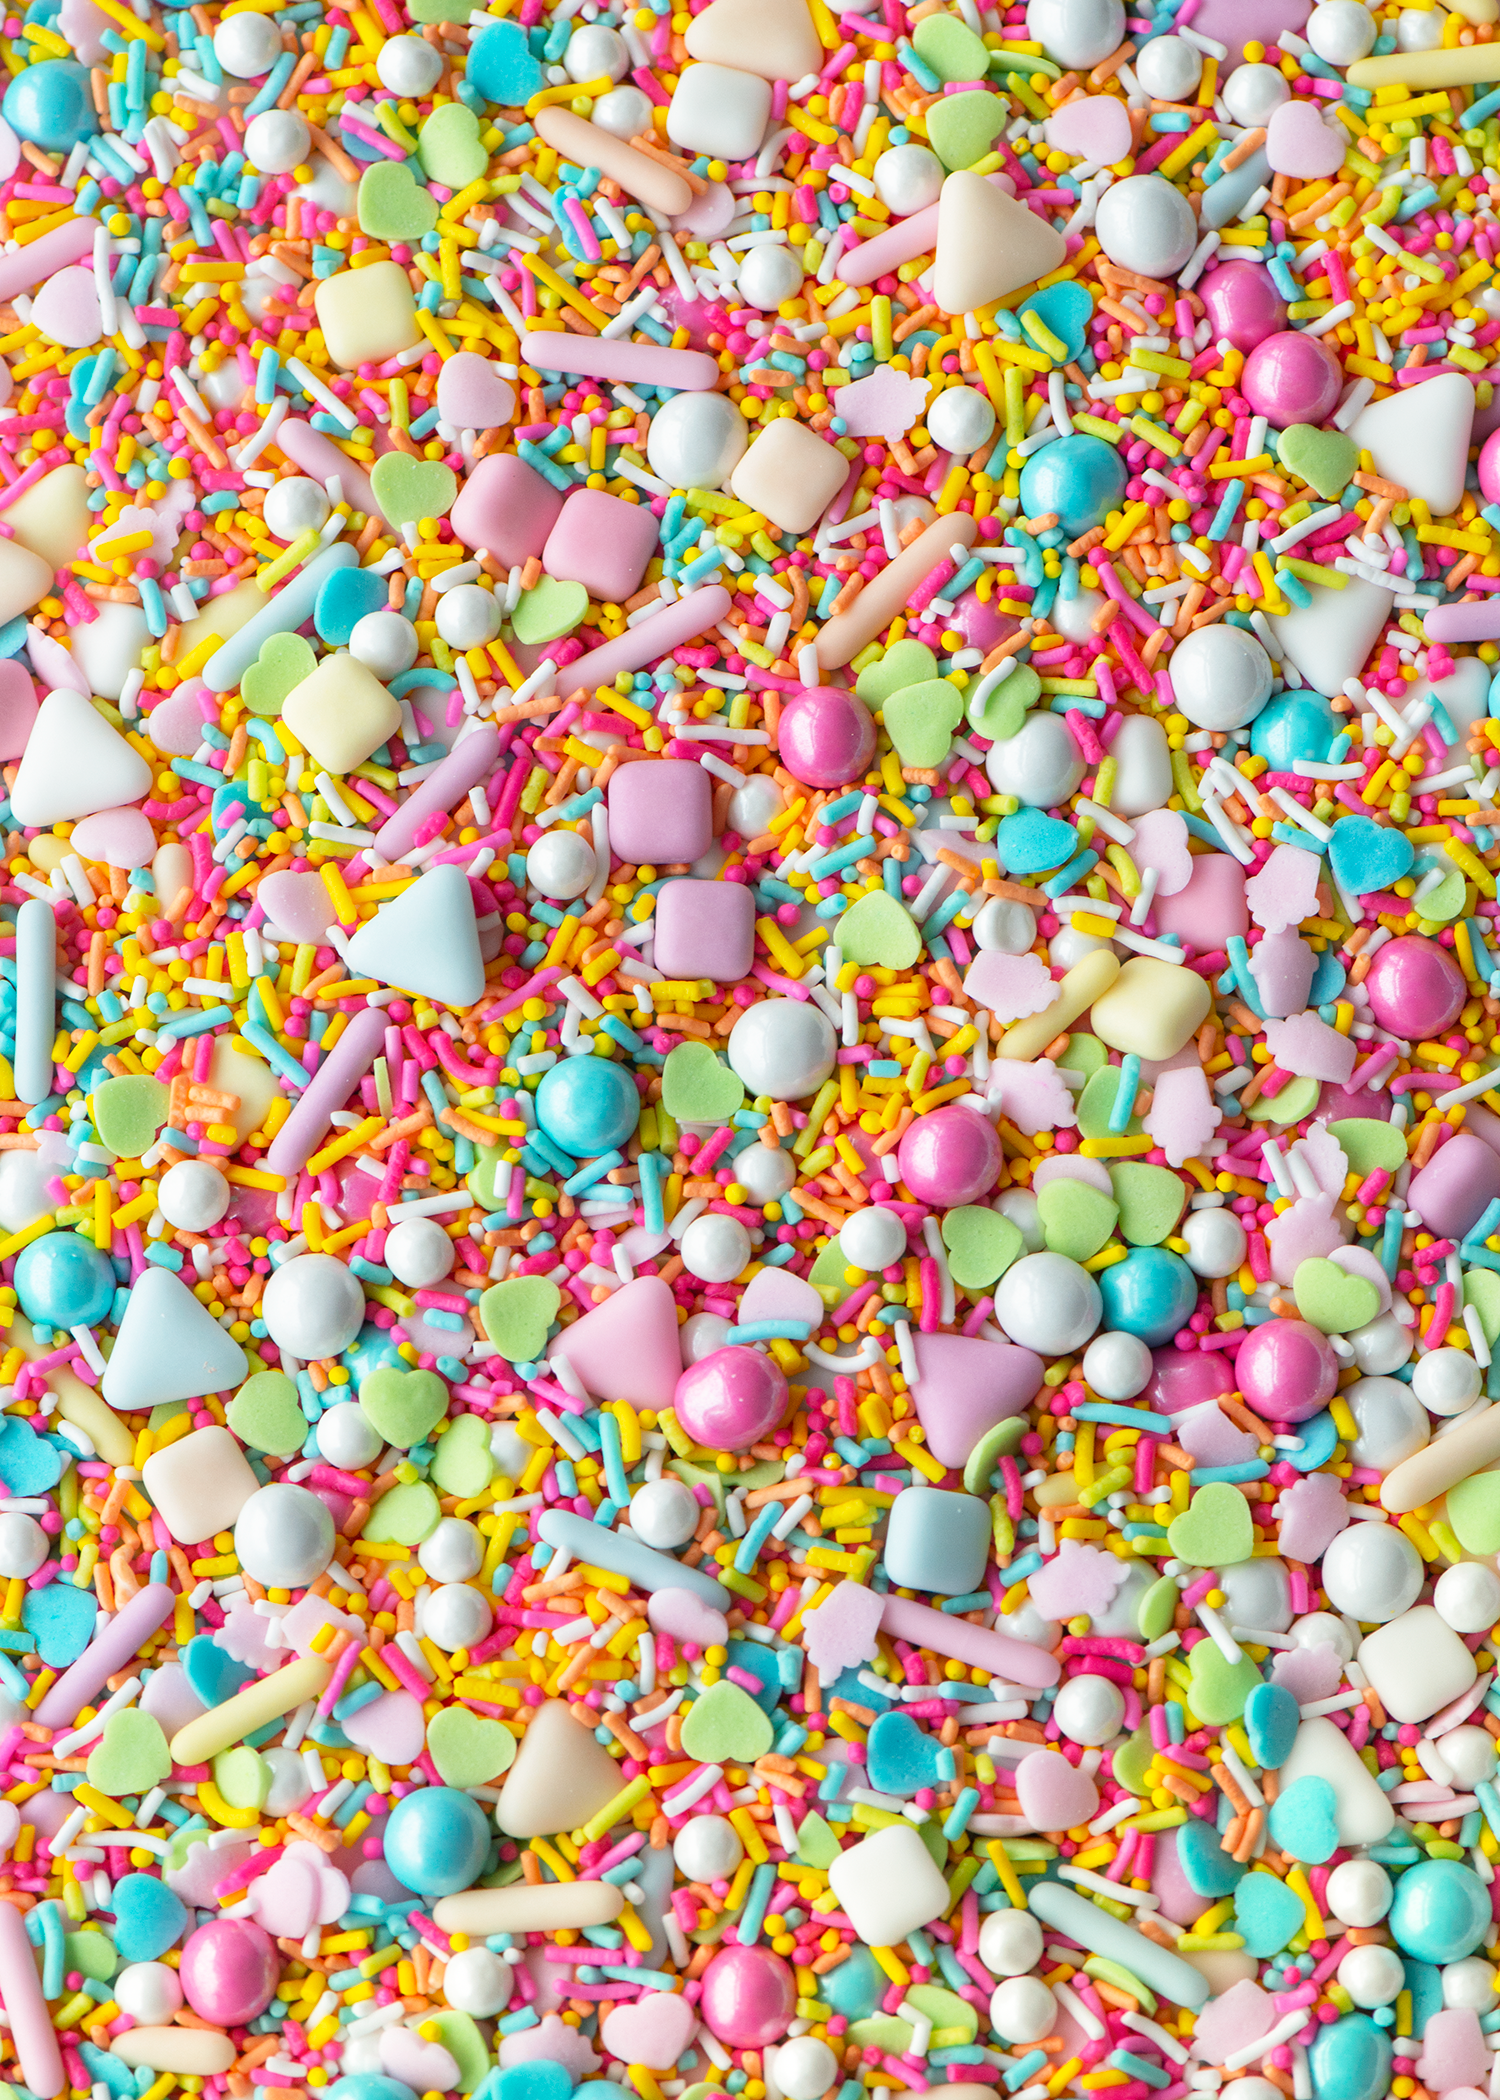 Wholesale 48pc Ice Cream Toppings Shipper (24) #483 Dazzle ice cream  sprinkles; (8) #1260 ice cream sprinkles; (8) #1270 chocolate sprinkles;  (8) #1269 Crunch